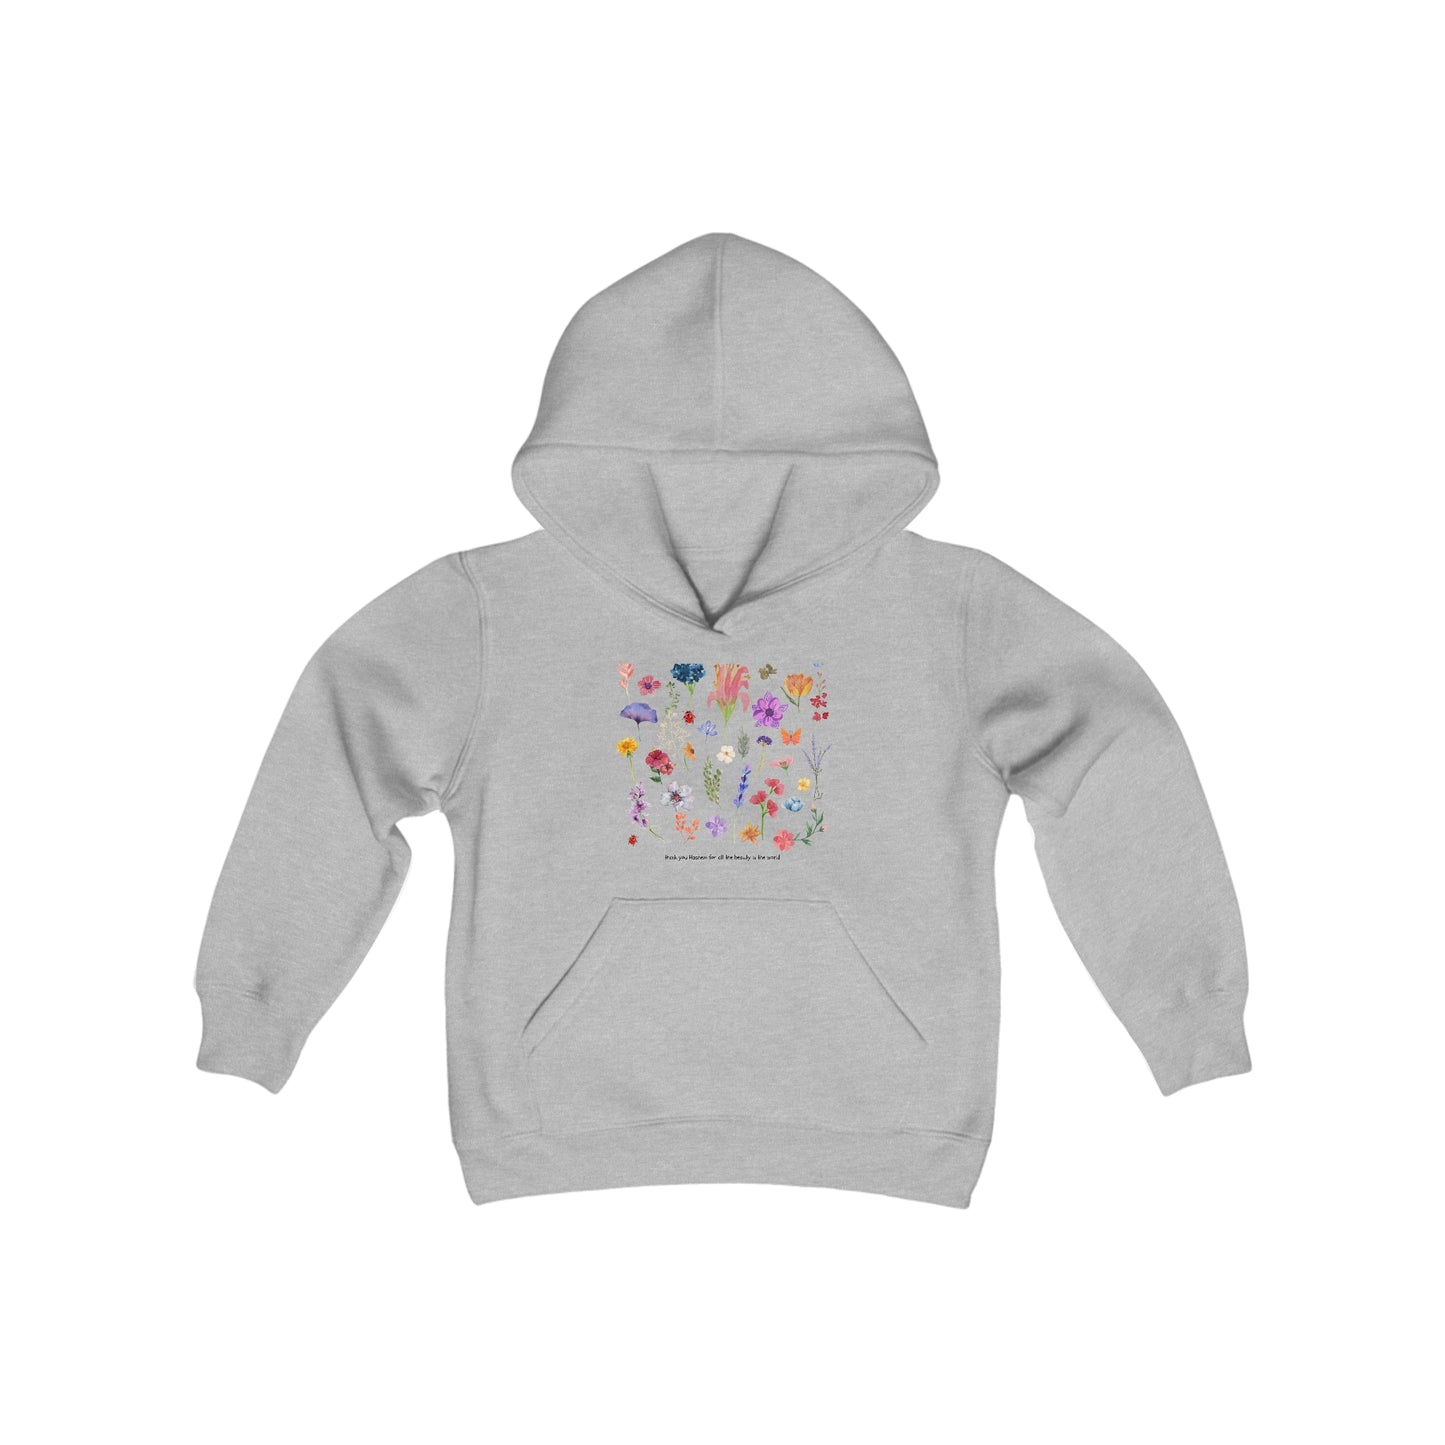 Girls "thank you Hashem for all the beauty in the world" Hooded Sweatshirt